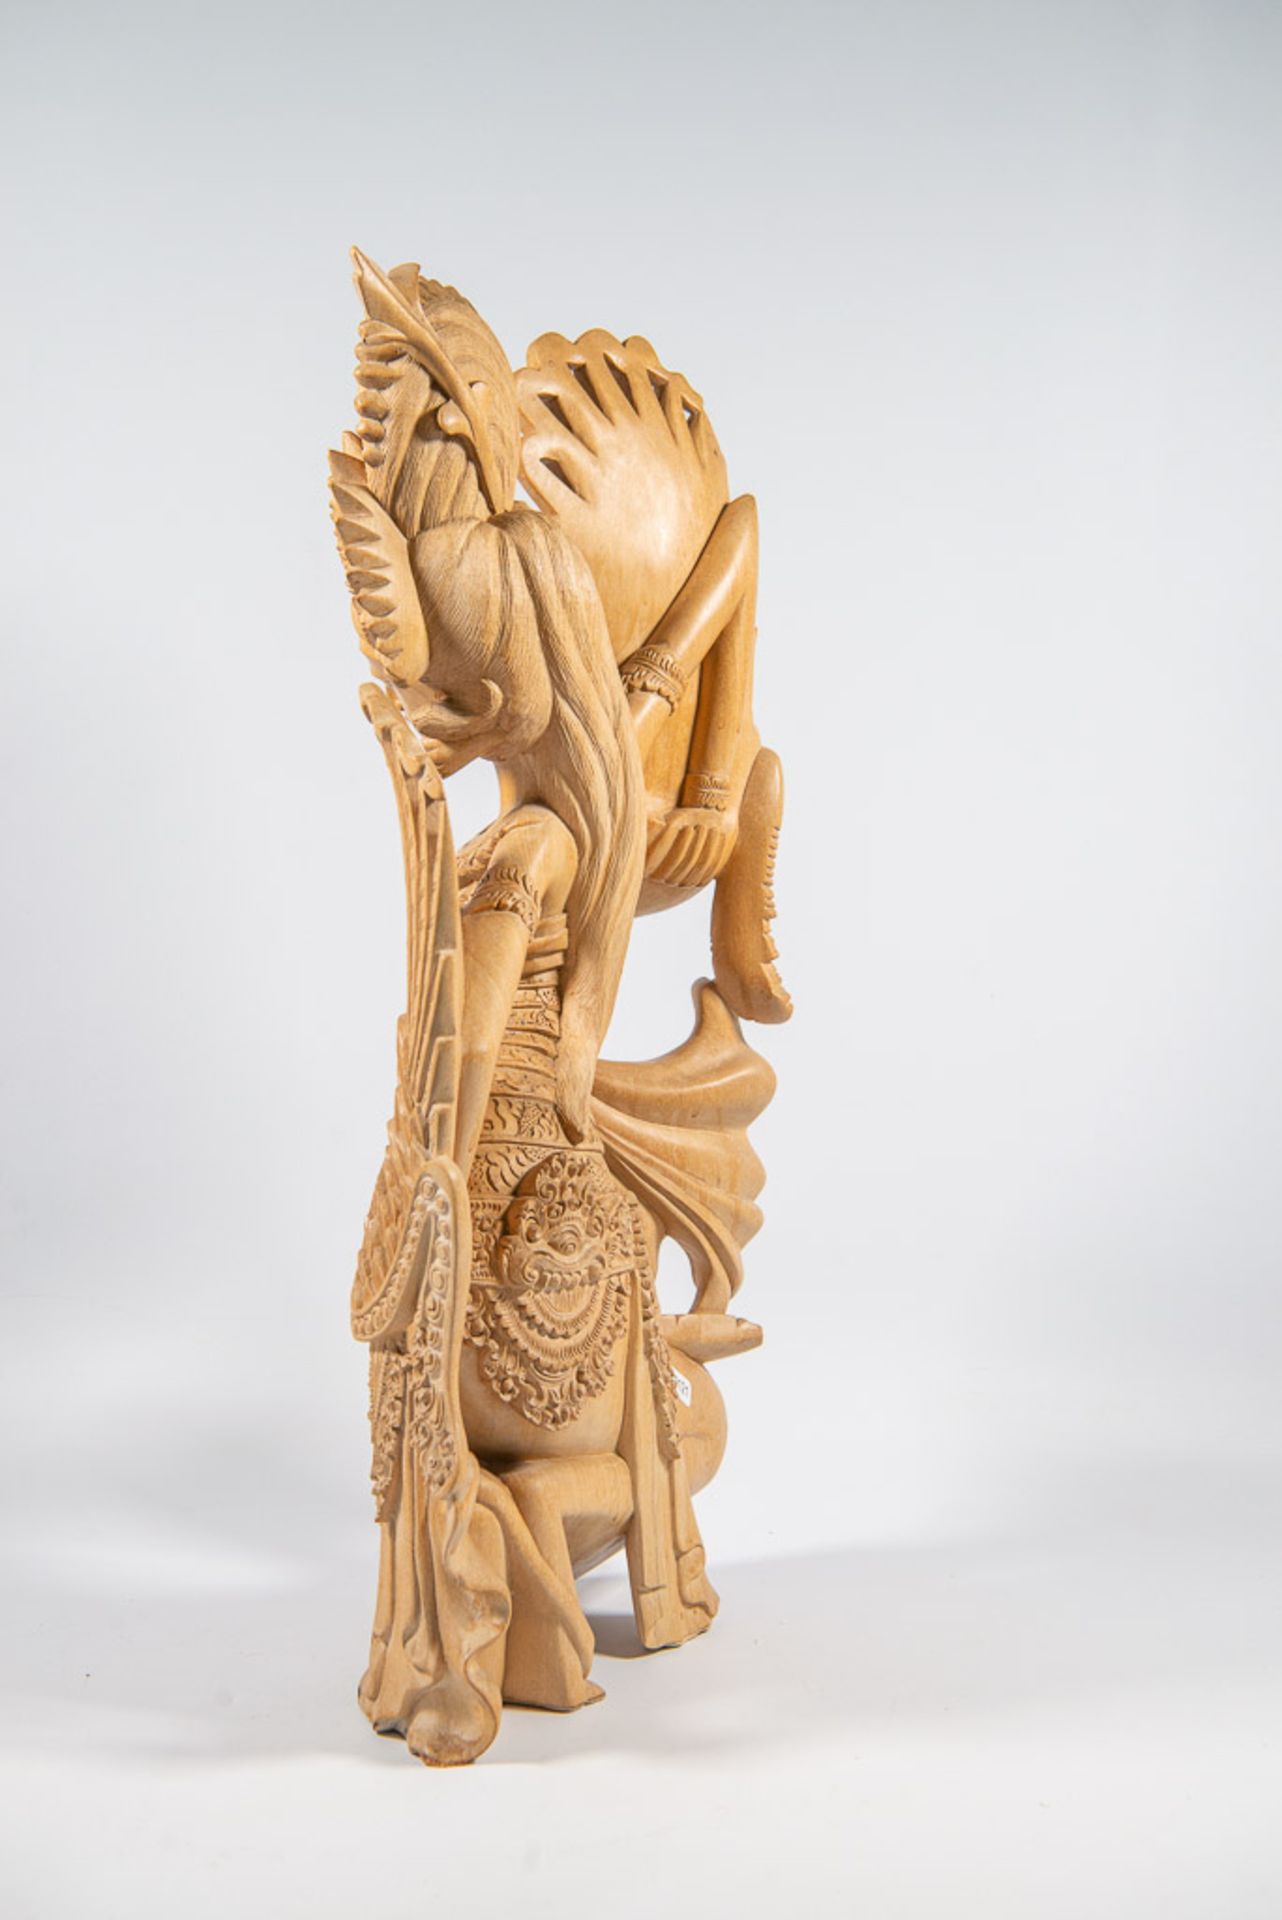 Indonesian wood sculpture - Image 2 of 5